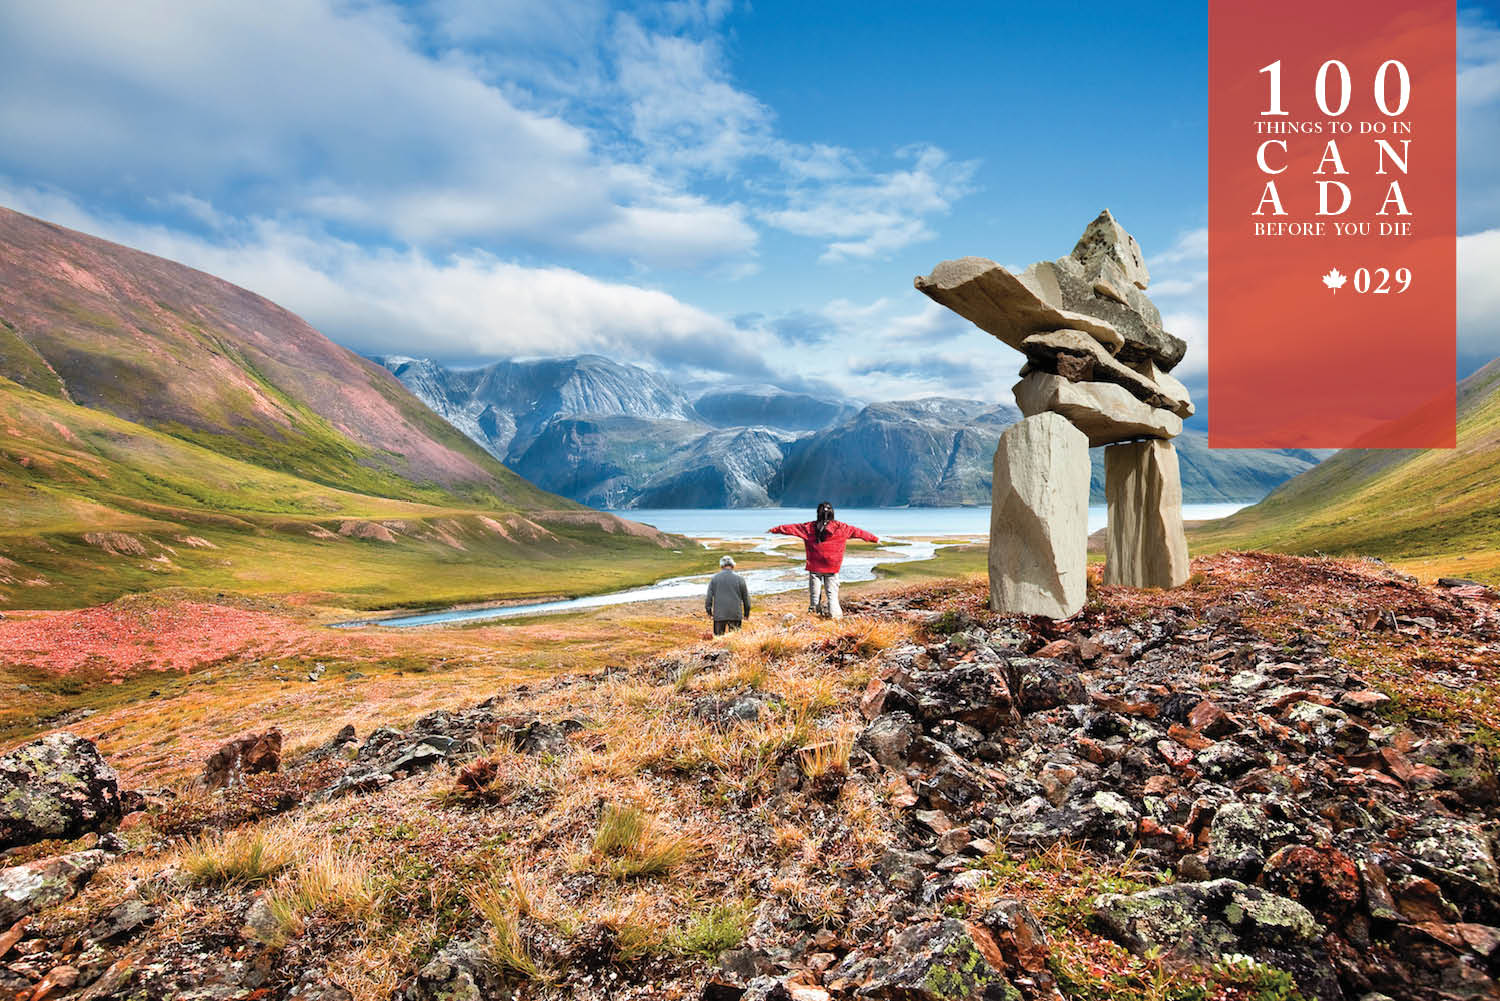 Get insight into Inuit life in the Torngat Mountains